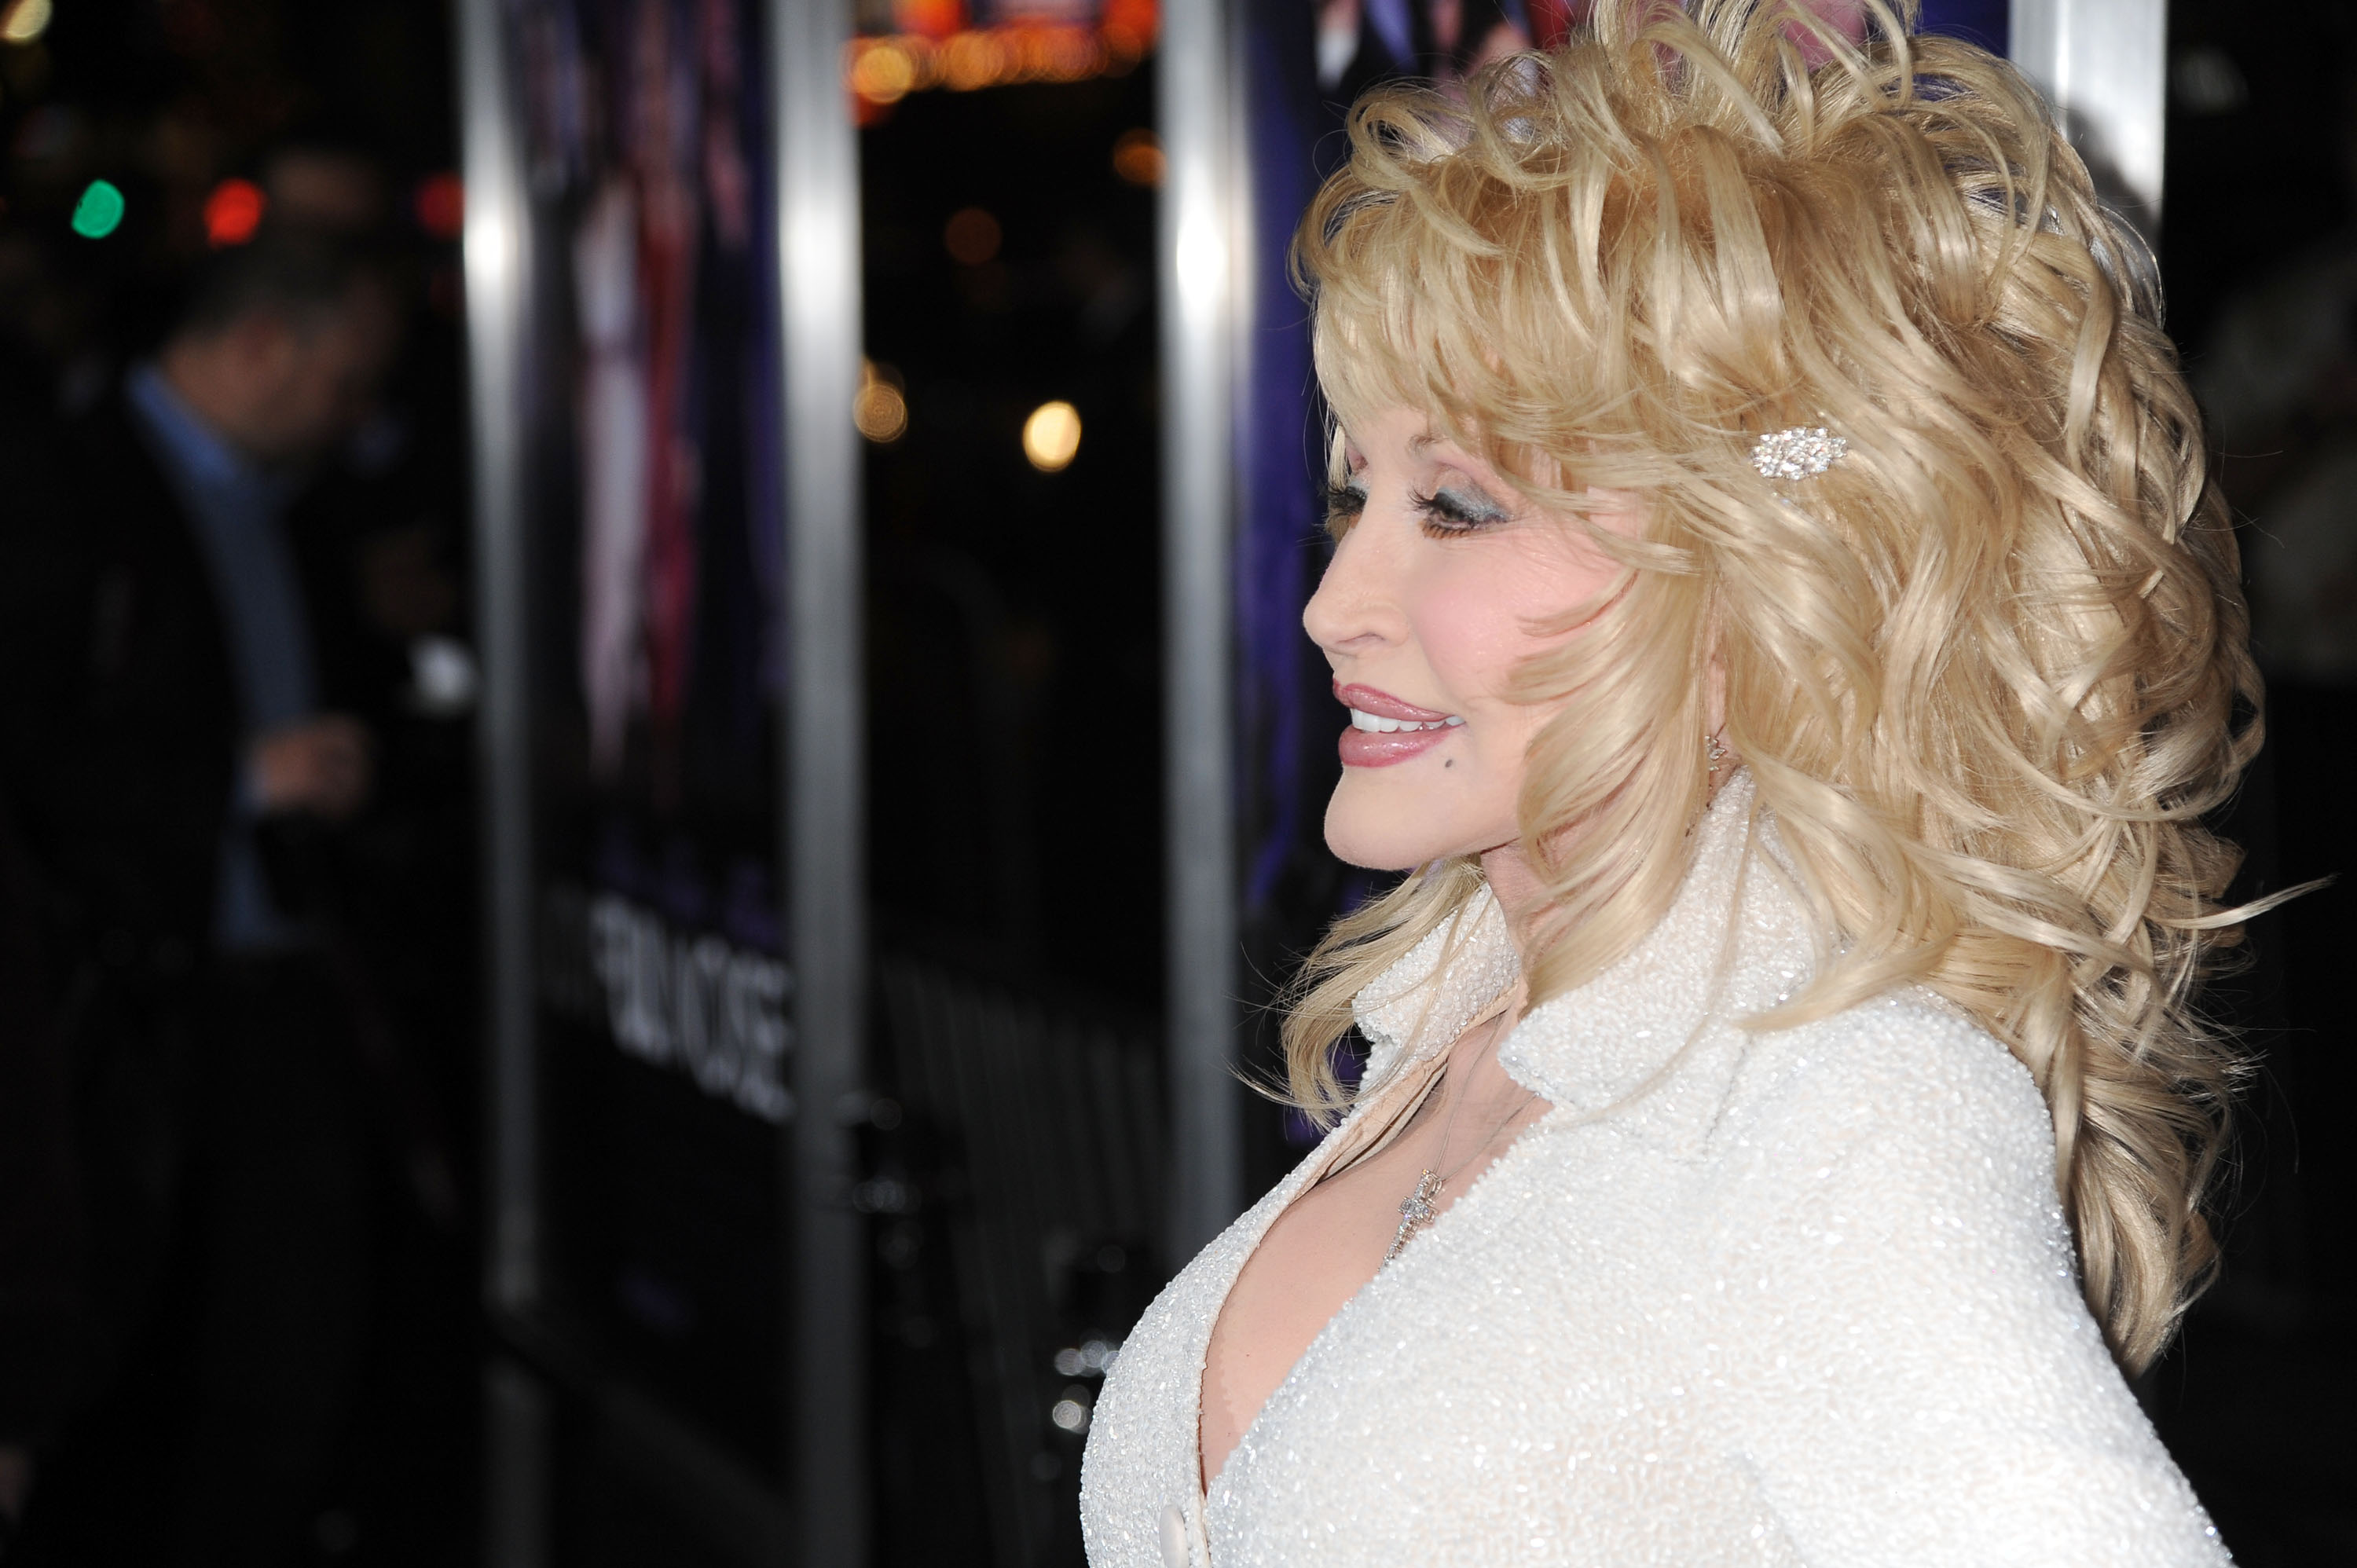 Dolly Parton poses for photos at the 'Joyful noise' premiere. She's in a white top.